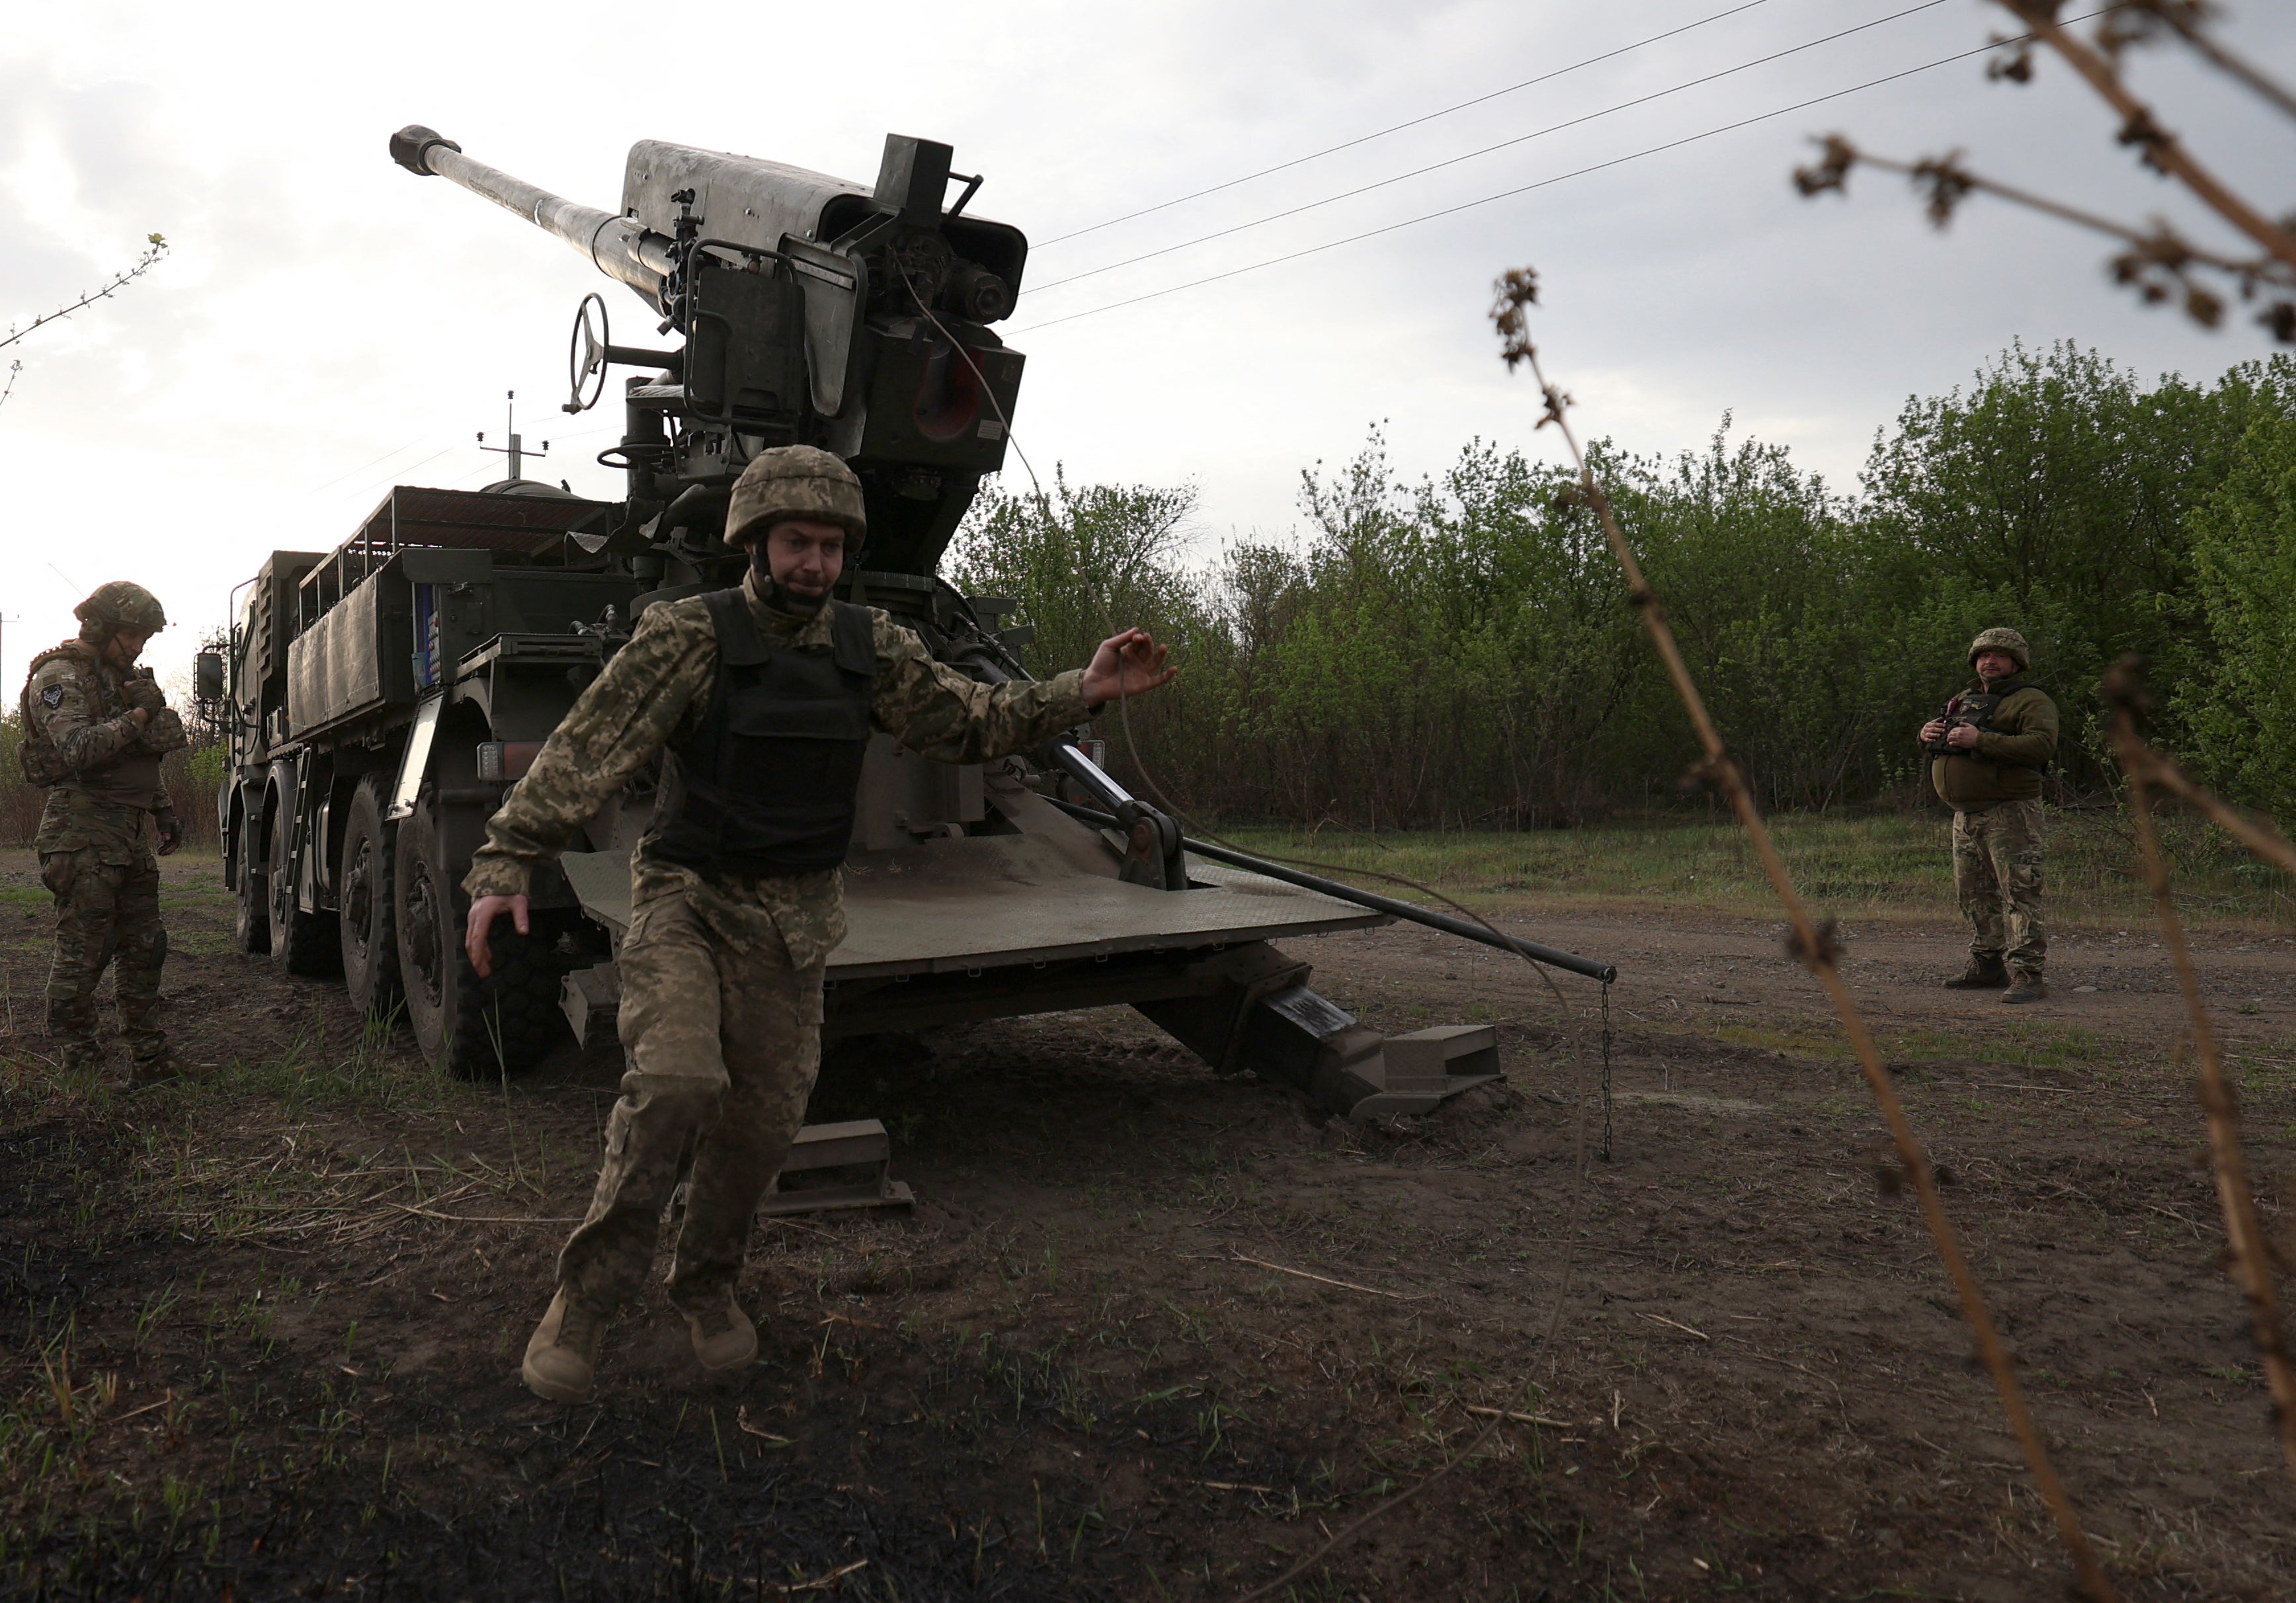 Ukrainian forces use a howitzer to hit Russian targets near Kharkiv